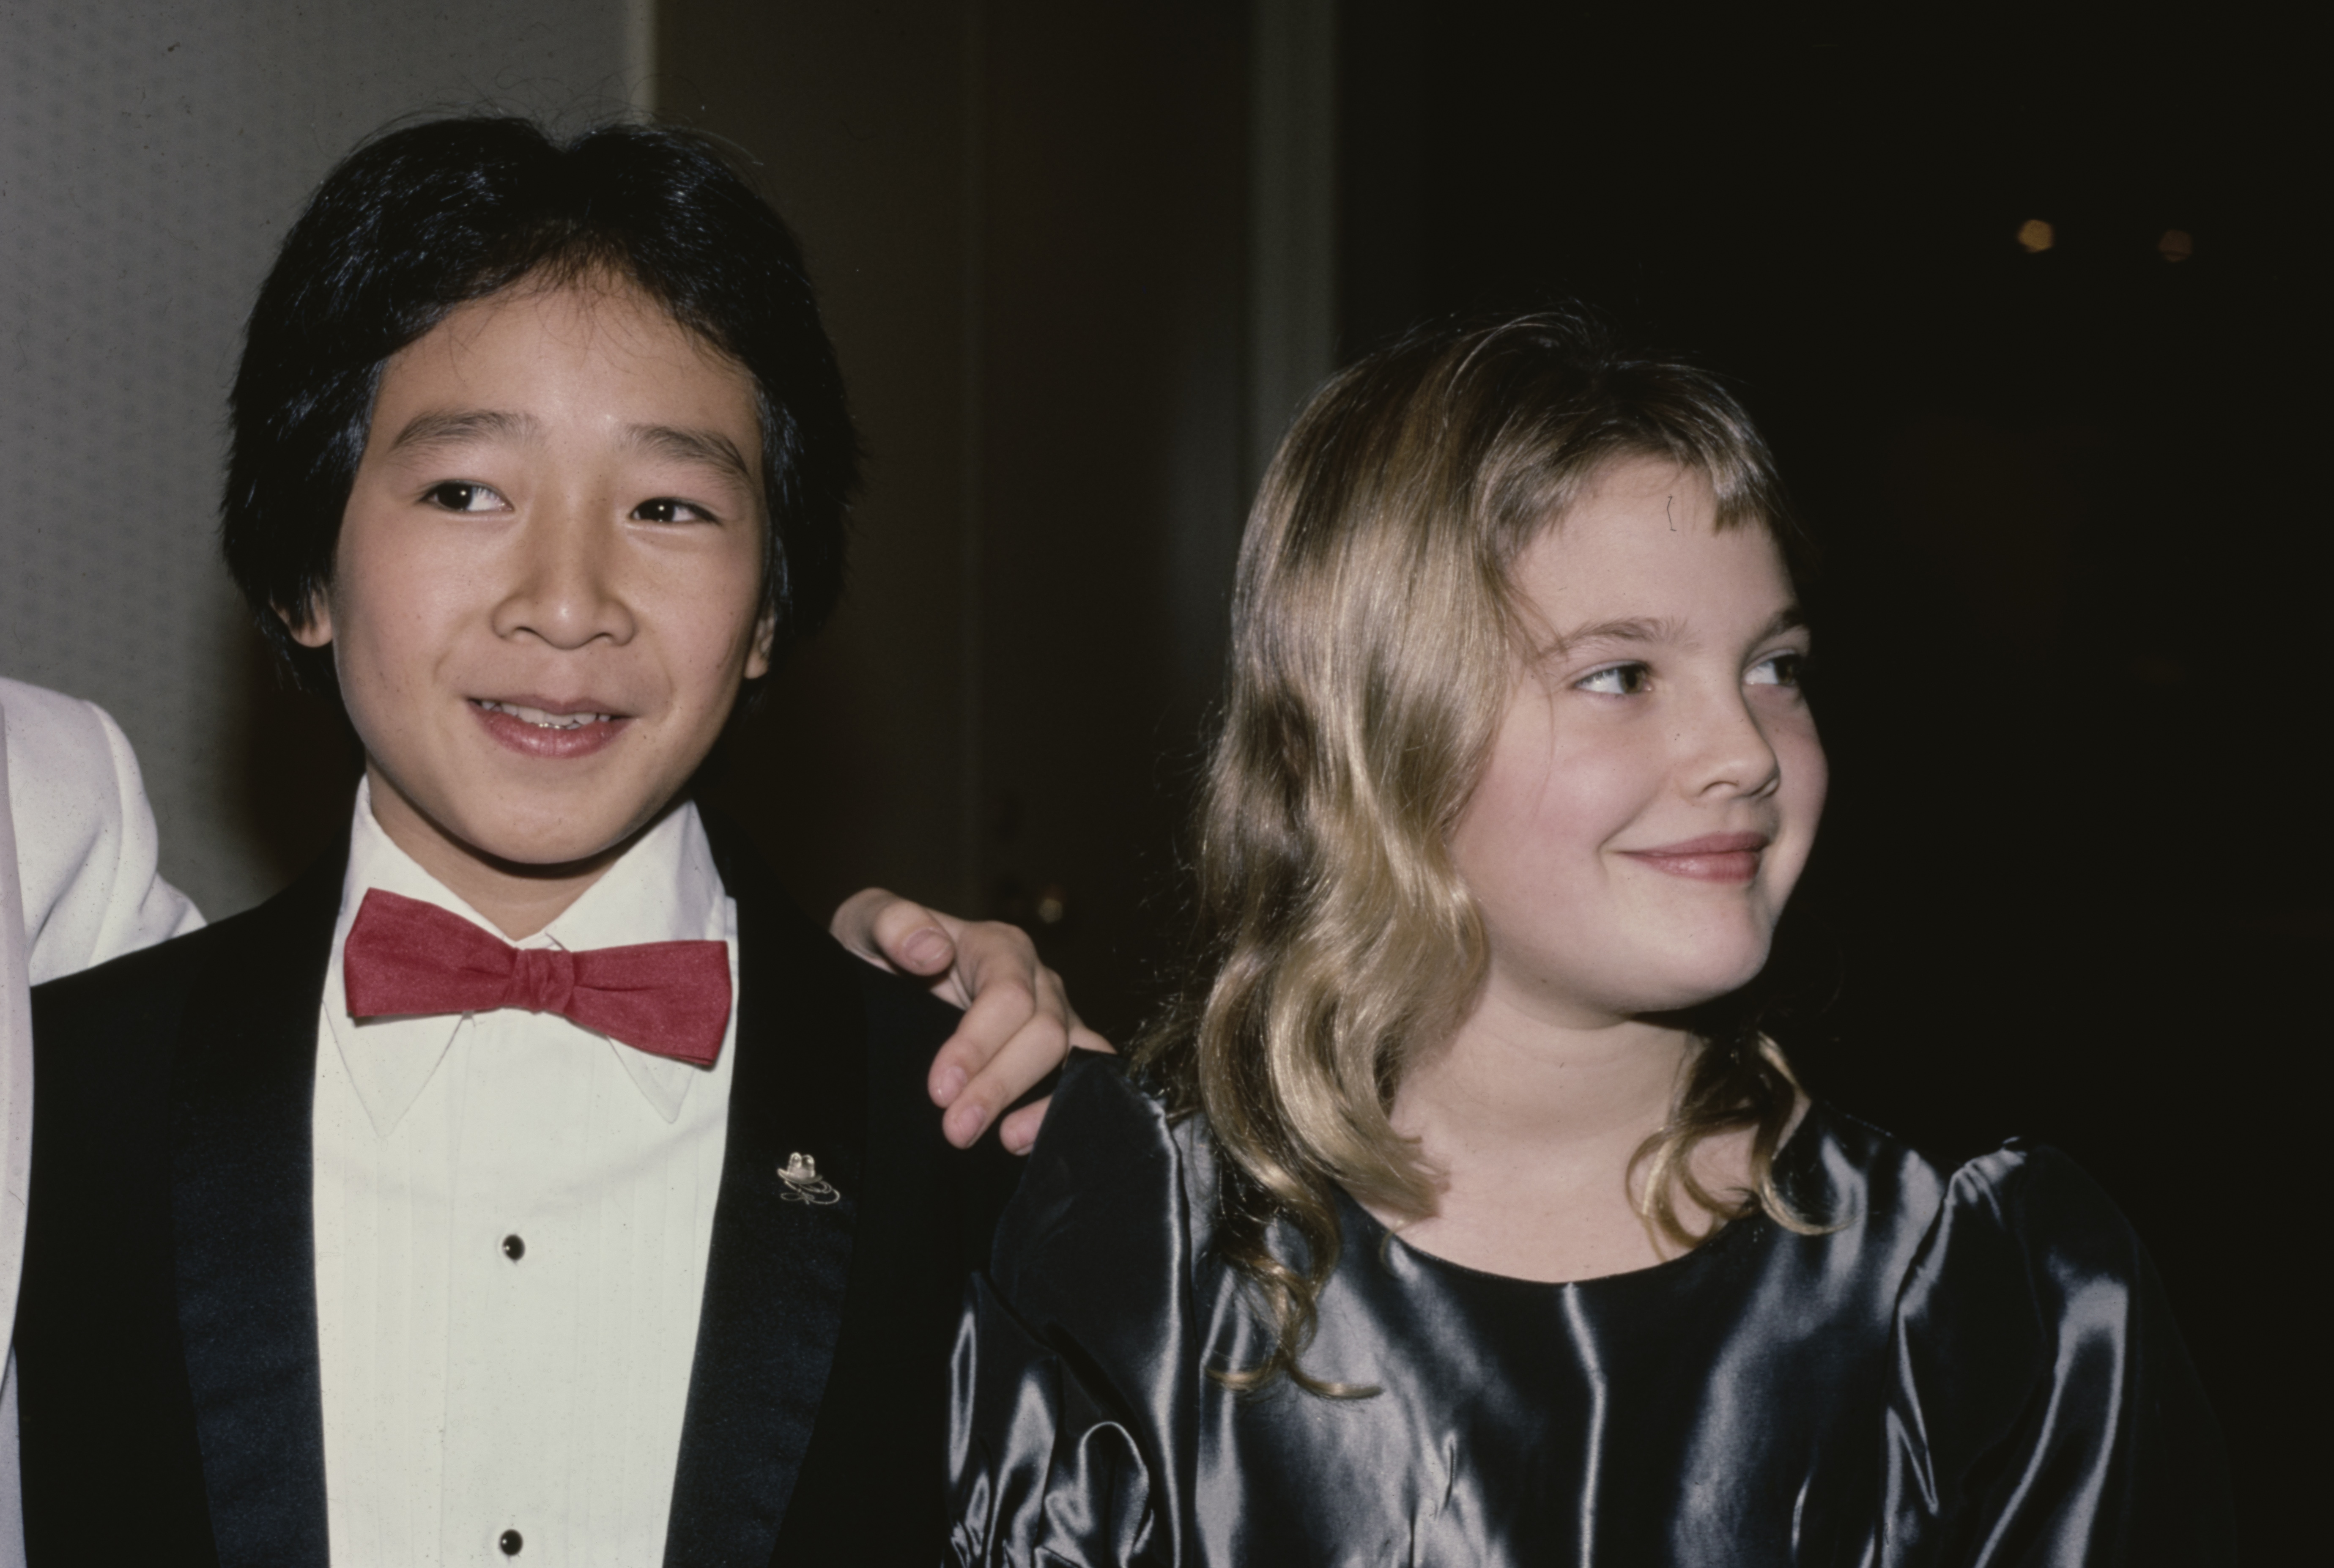 Ke Huy Quan and Drew Barrymore in Los Angeles, California, December 2, 1984. | Source: Getty Images